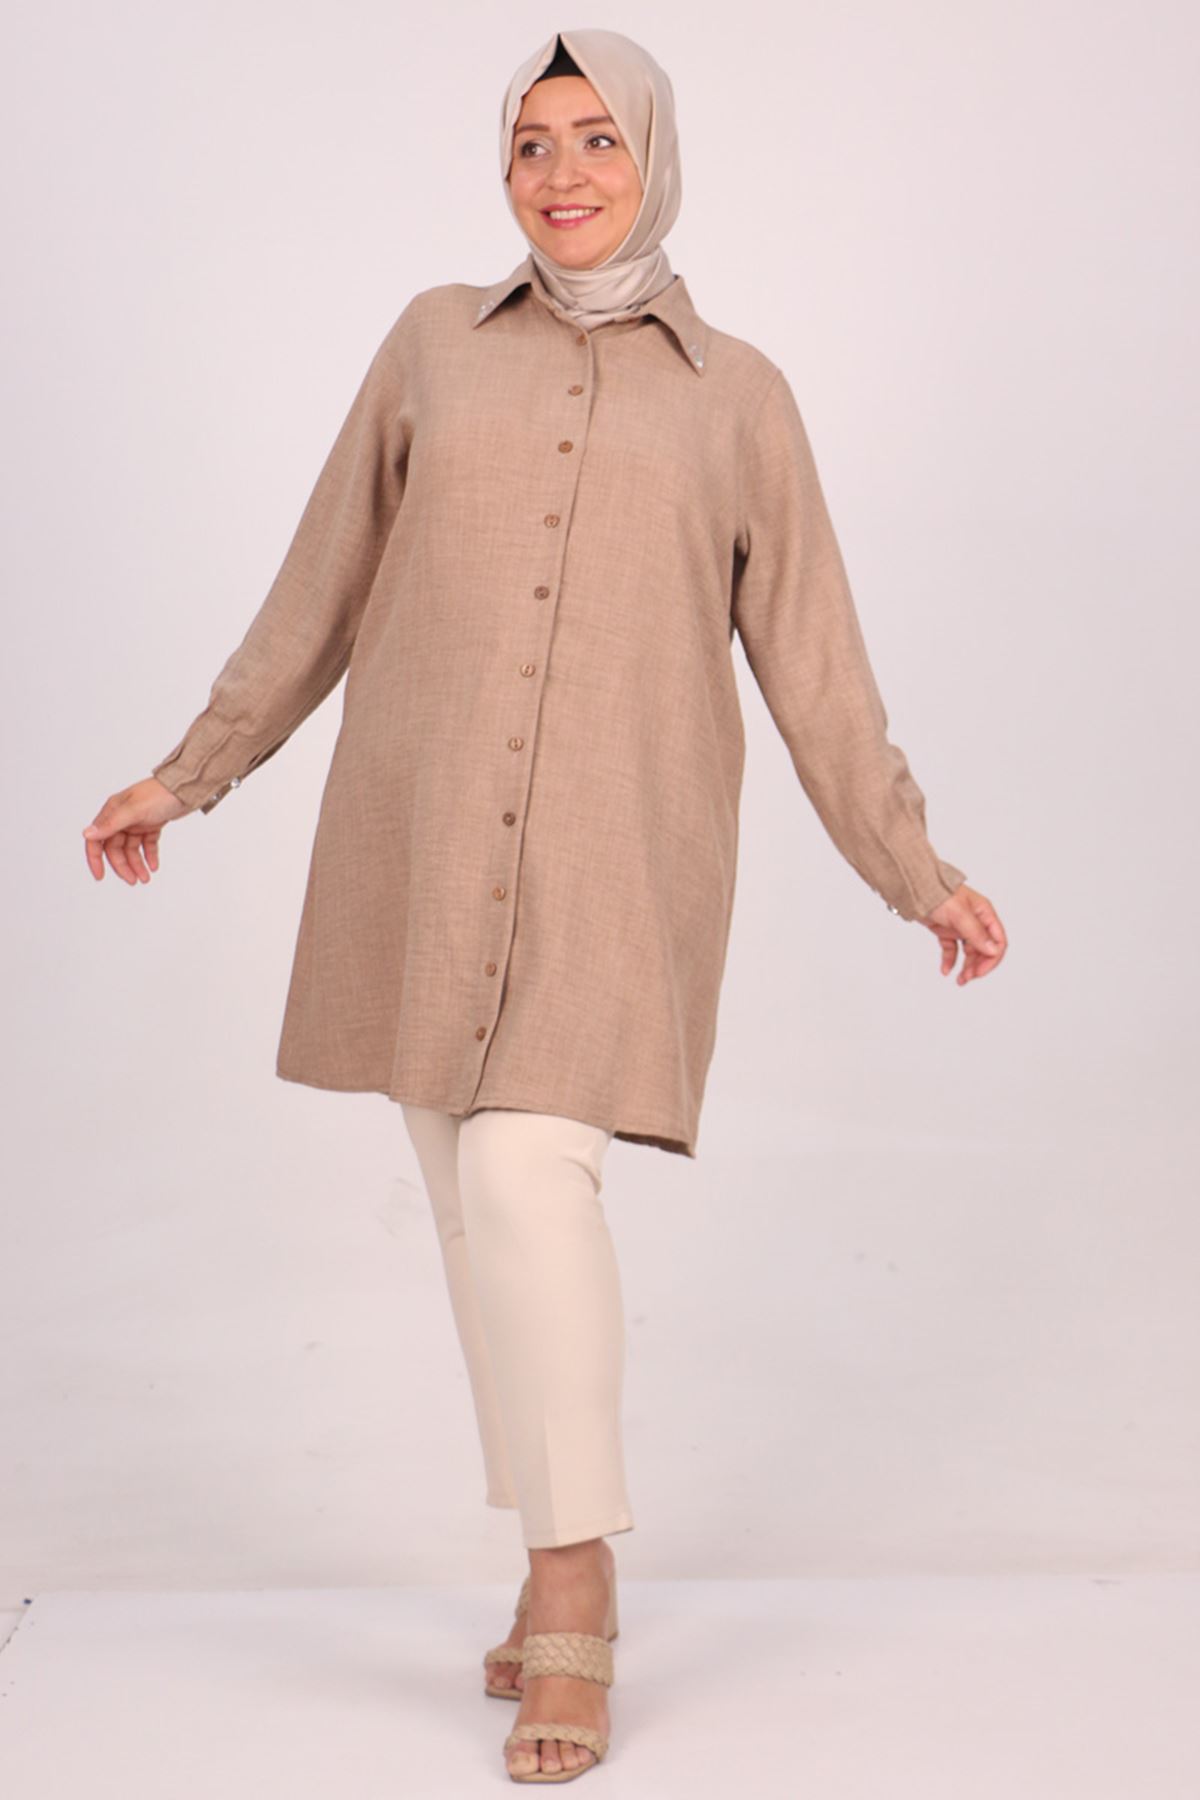 38095 Large Size Linen Airobin Shirt with Stone Collar - Brown with Milk